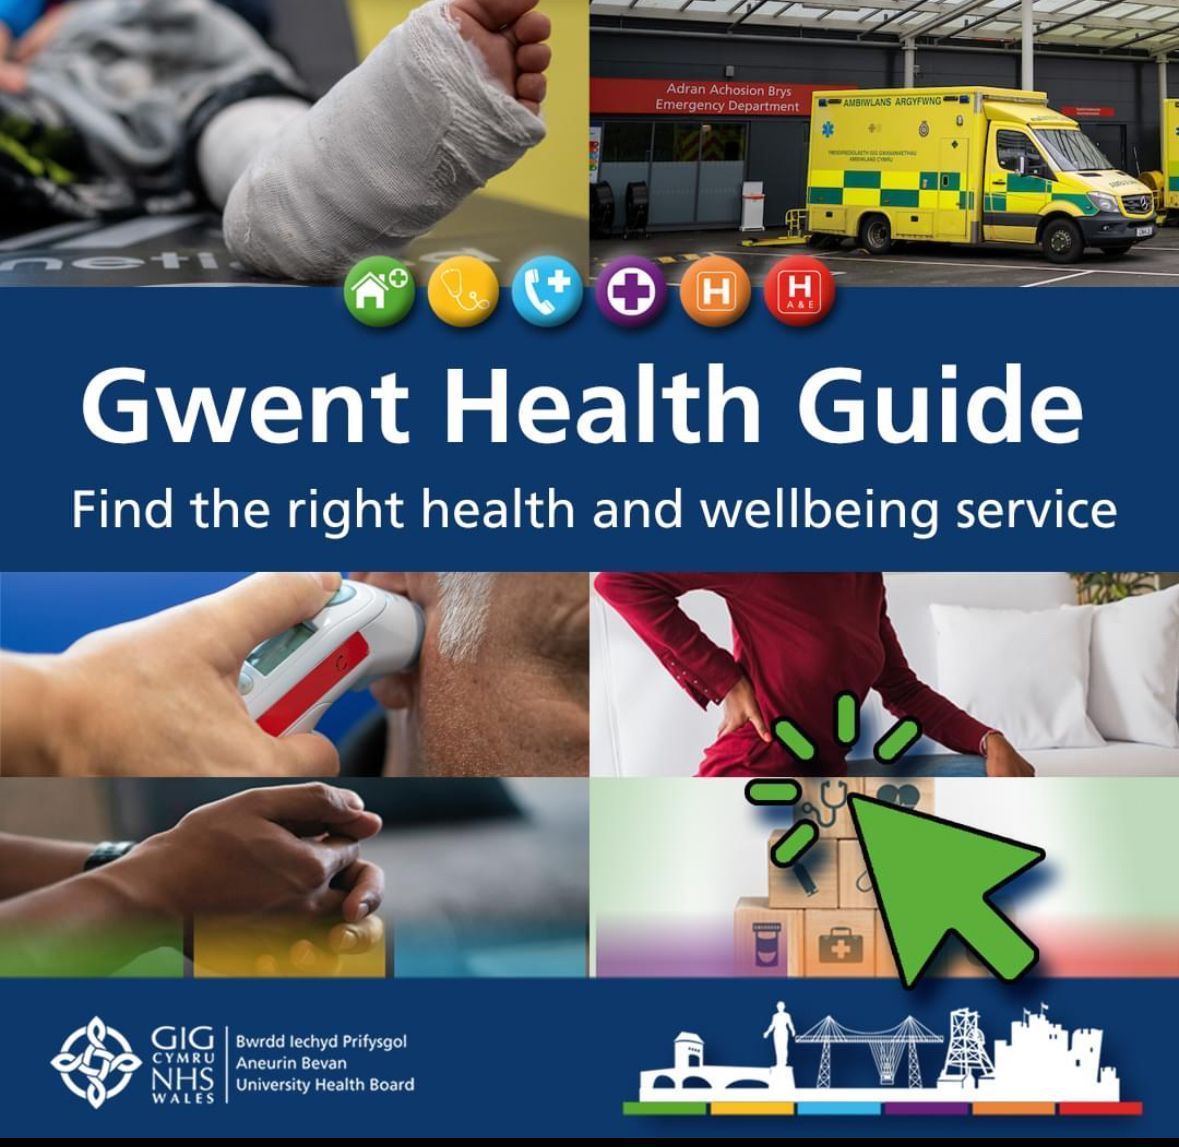 If you become injured or feel unwell, use our Gwent Health Guide to make sure you and your family know where to go for help. Check it out here: buff.ly/3N860oD #HelpUsHelpYou